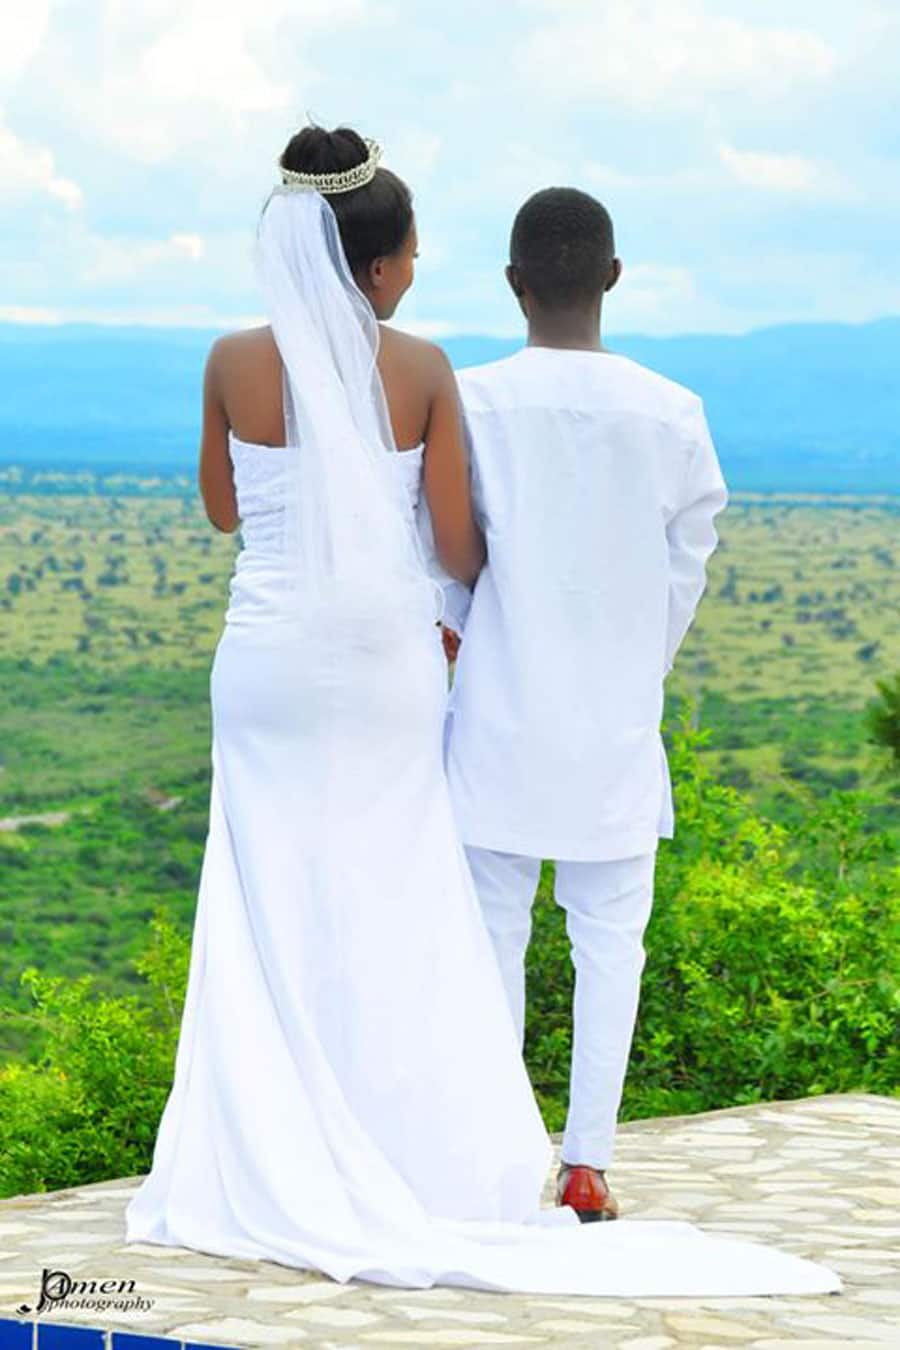 Ugandan singer holds lavish wedding with only 11 invited guests